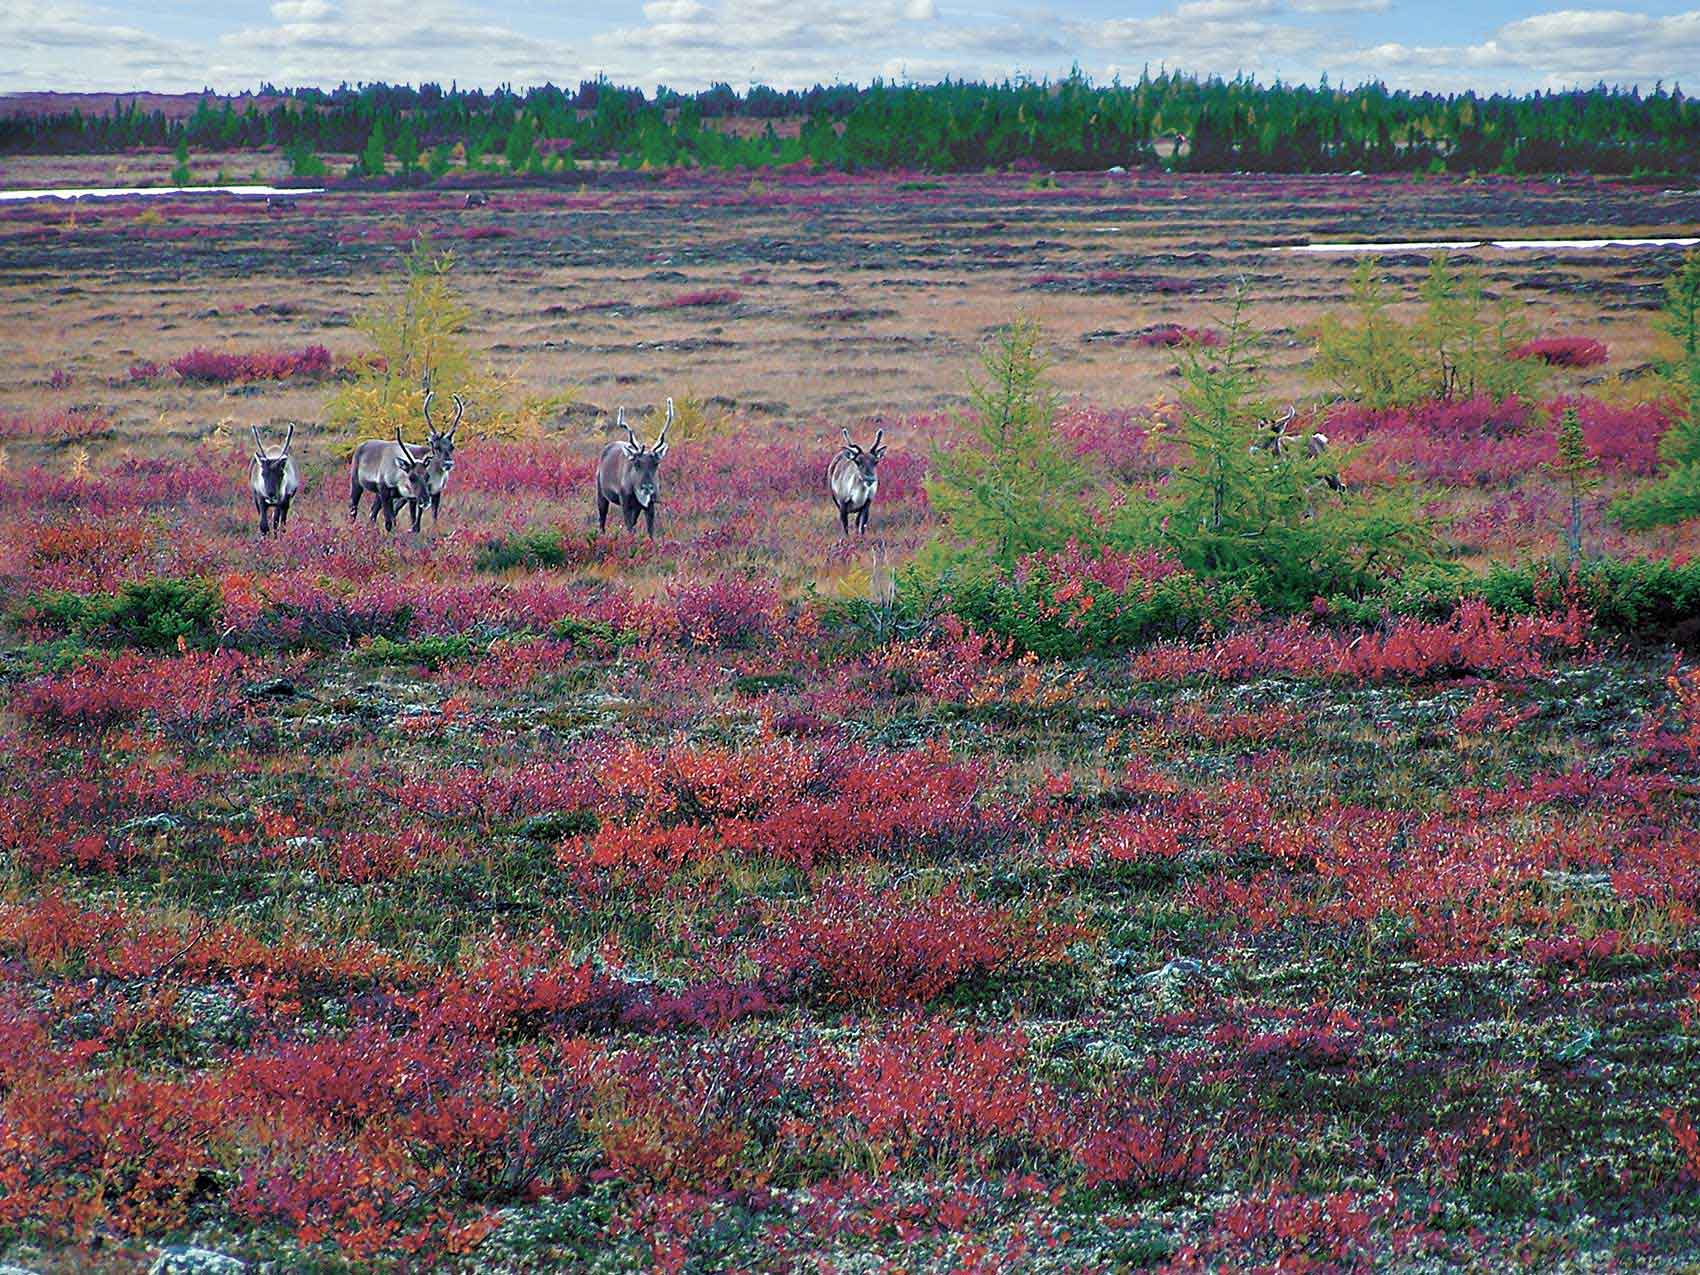 Landscape of fall reds and browns with a hint of greenery and running caribou